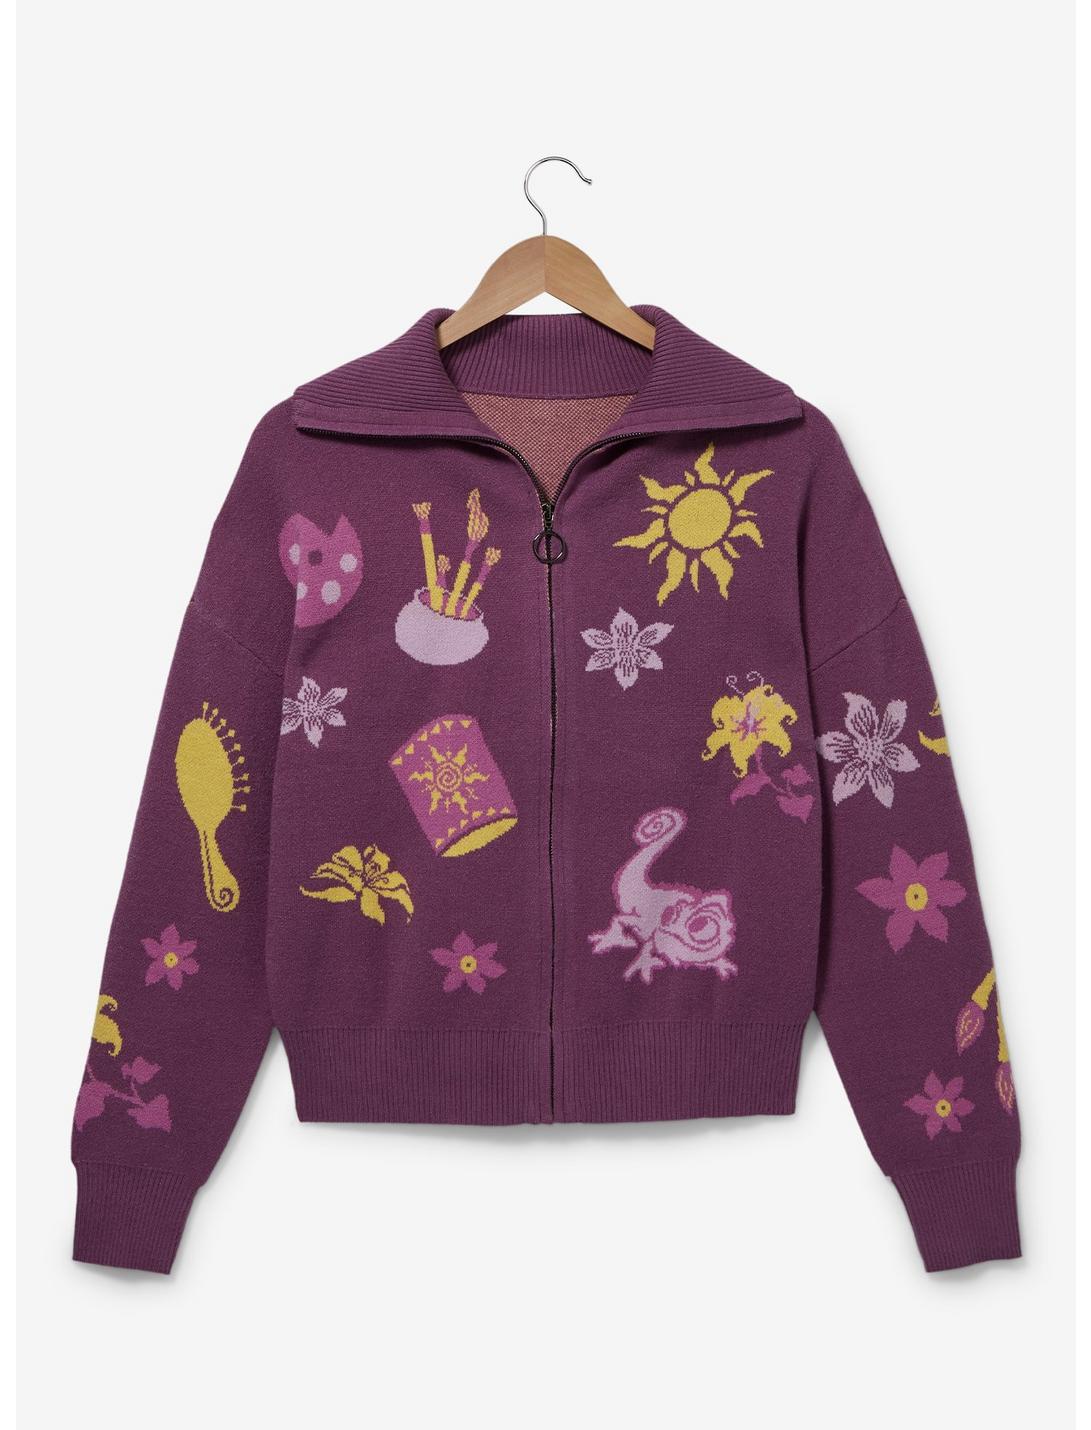 Disney Tangled Icons Zippered Women's Plus Size Sweater - BoxLunch Exclusive, PURPLE, hi-res